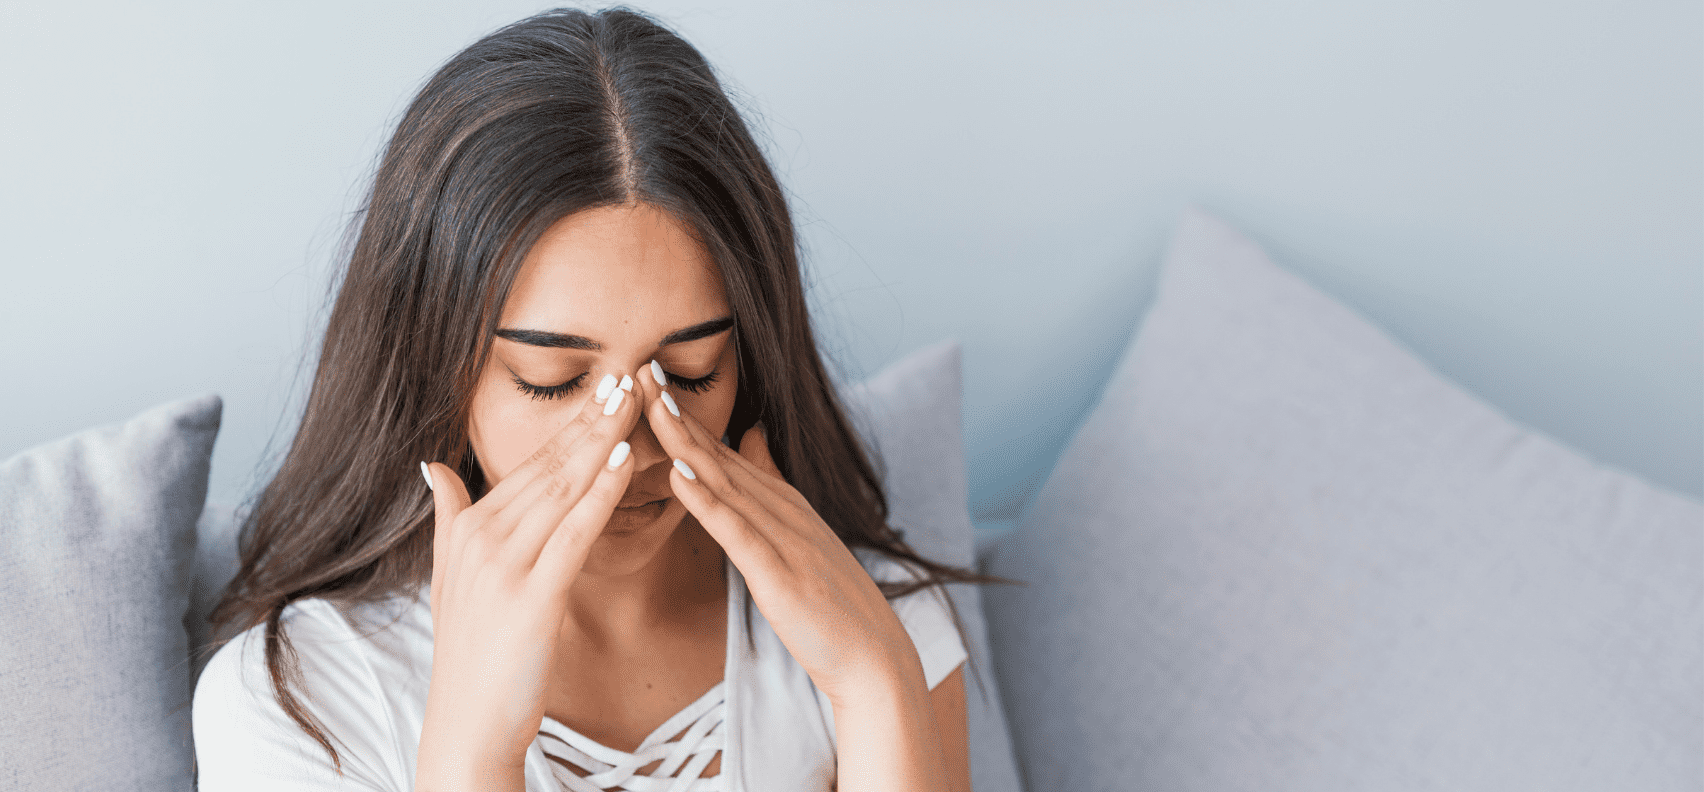 Woman feeling pressure on her face from sinusitis